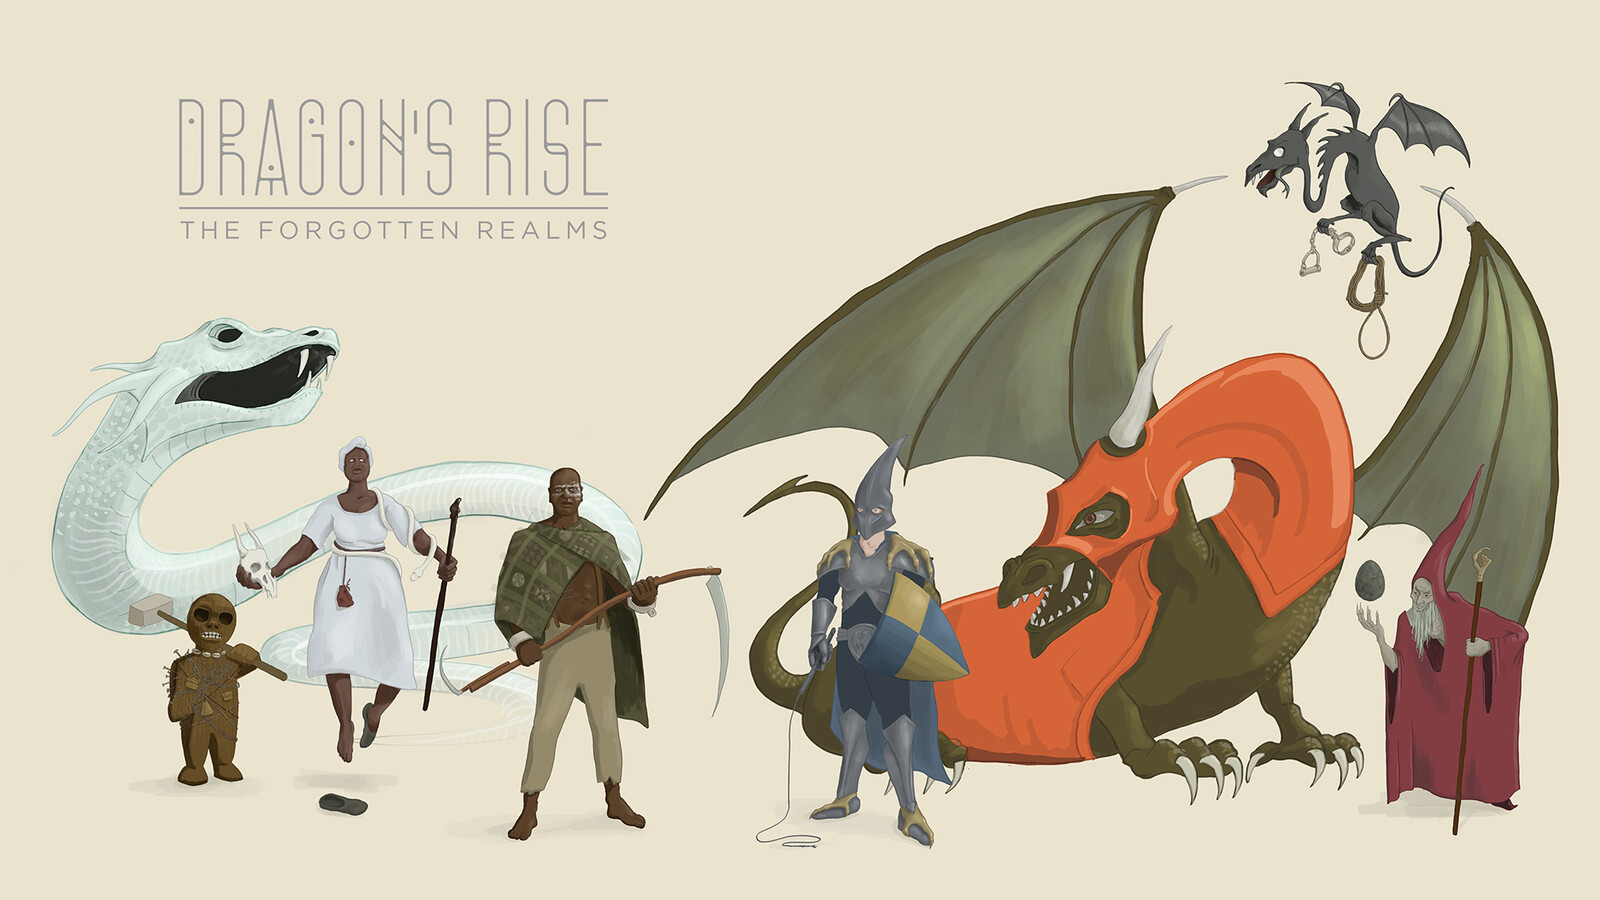 Here is the lineup of the final character and creature designs.